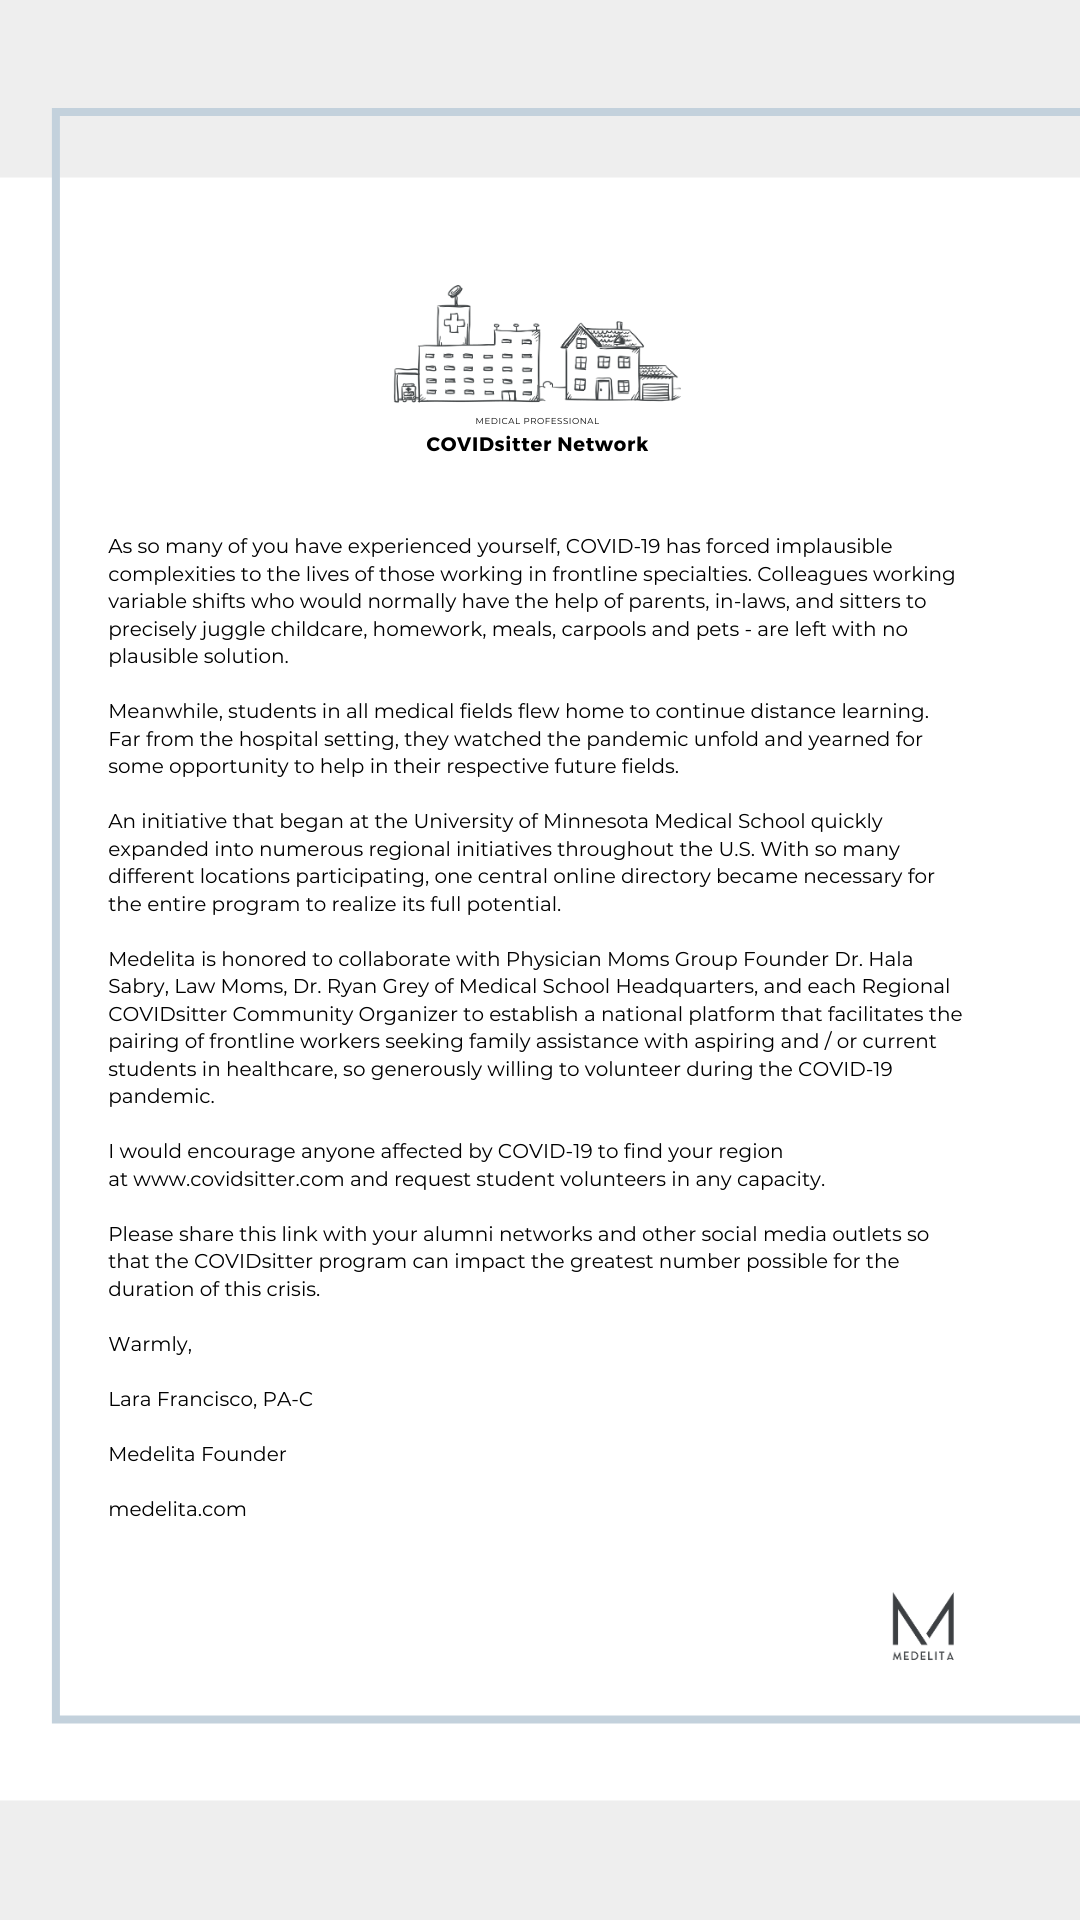 Letter from MEDELITA Founder About COVIDsitters